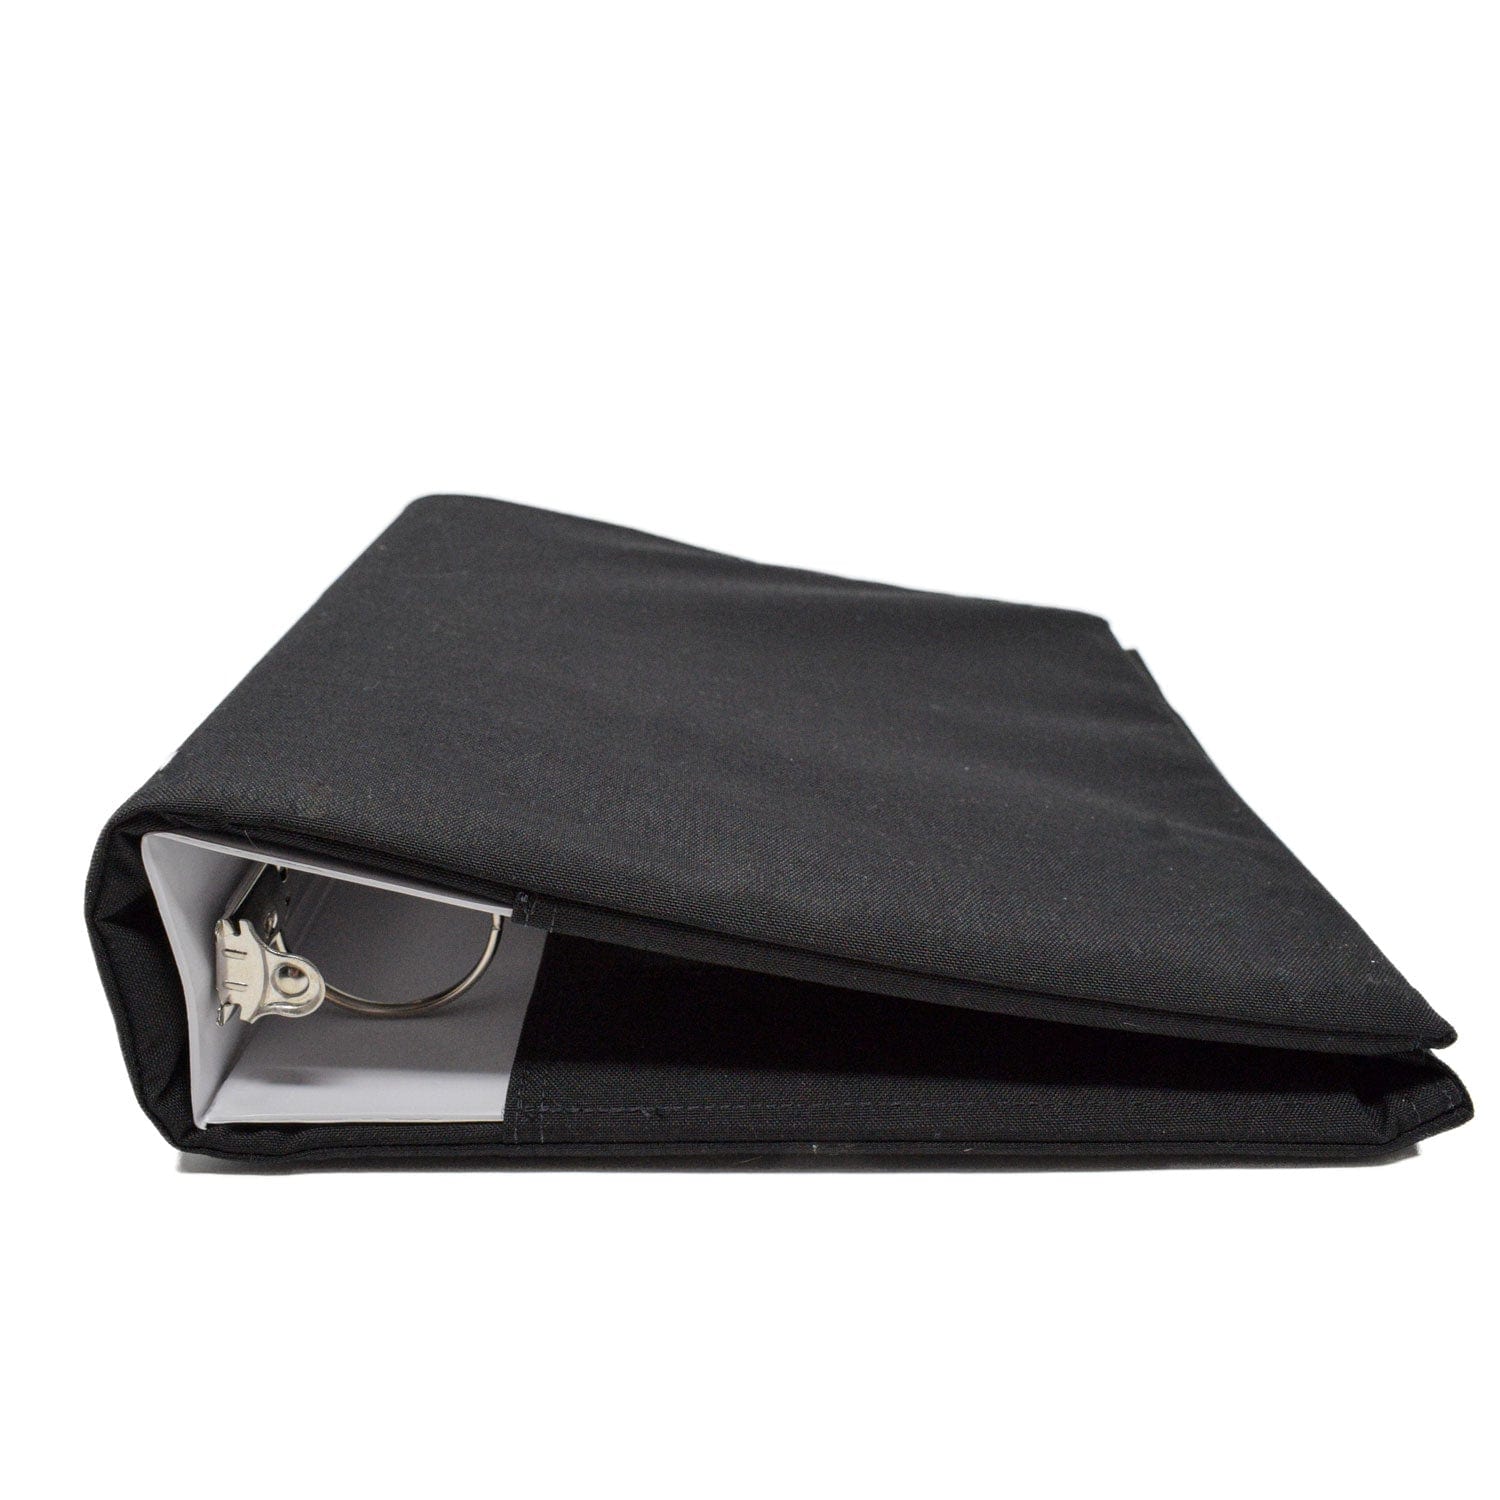 Image of bulletproof binder cover. A perfect addition if you're searching armor for children in the midst of school shootings. 